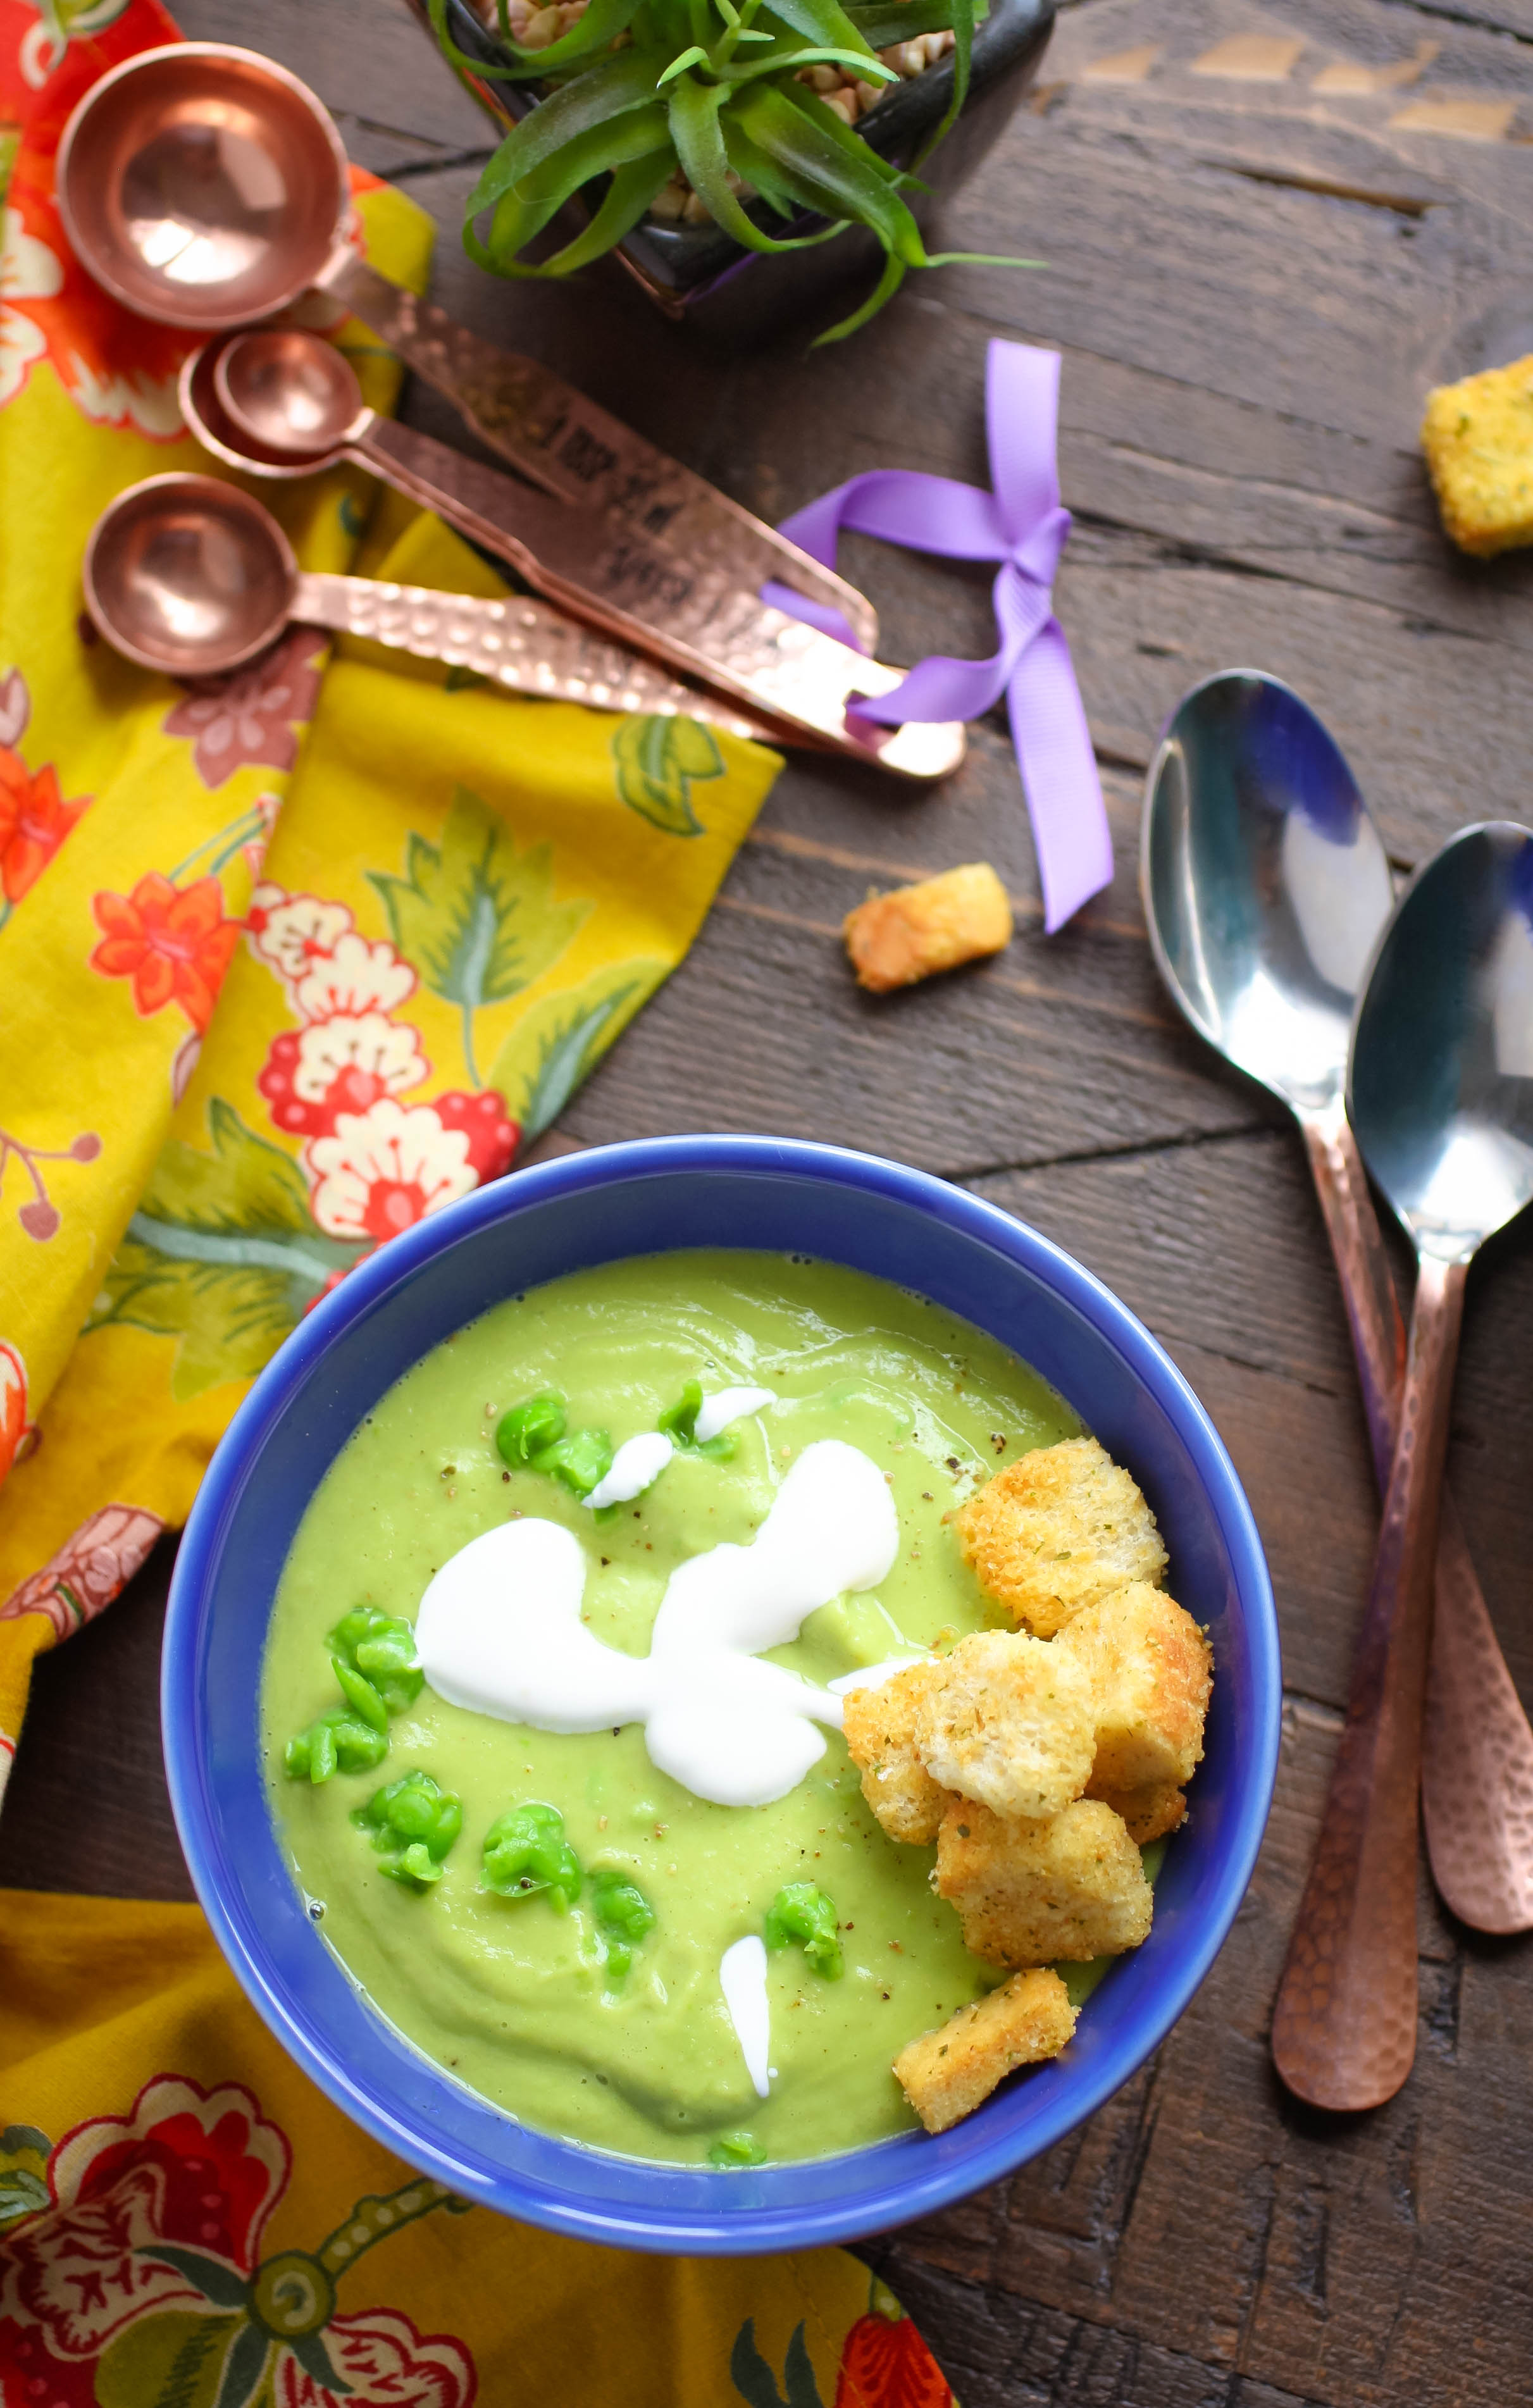 Warm Avocado and Pea Soup is such a tasty, vegetarian dish for this spring! Warm Avocado and Pea Soup is a lovely dish to serve this spring.